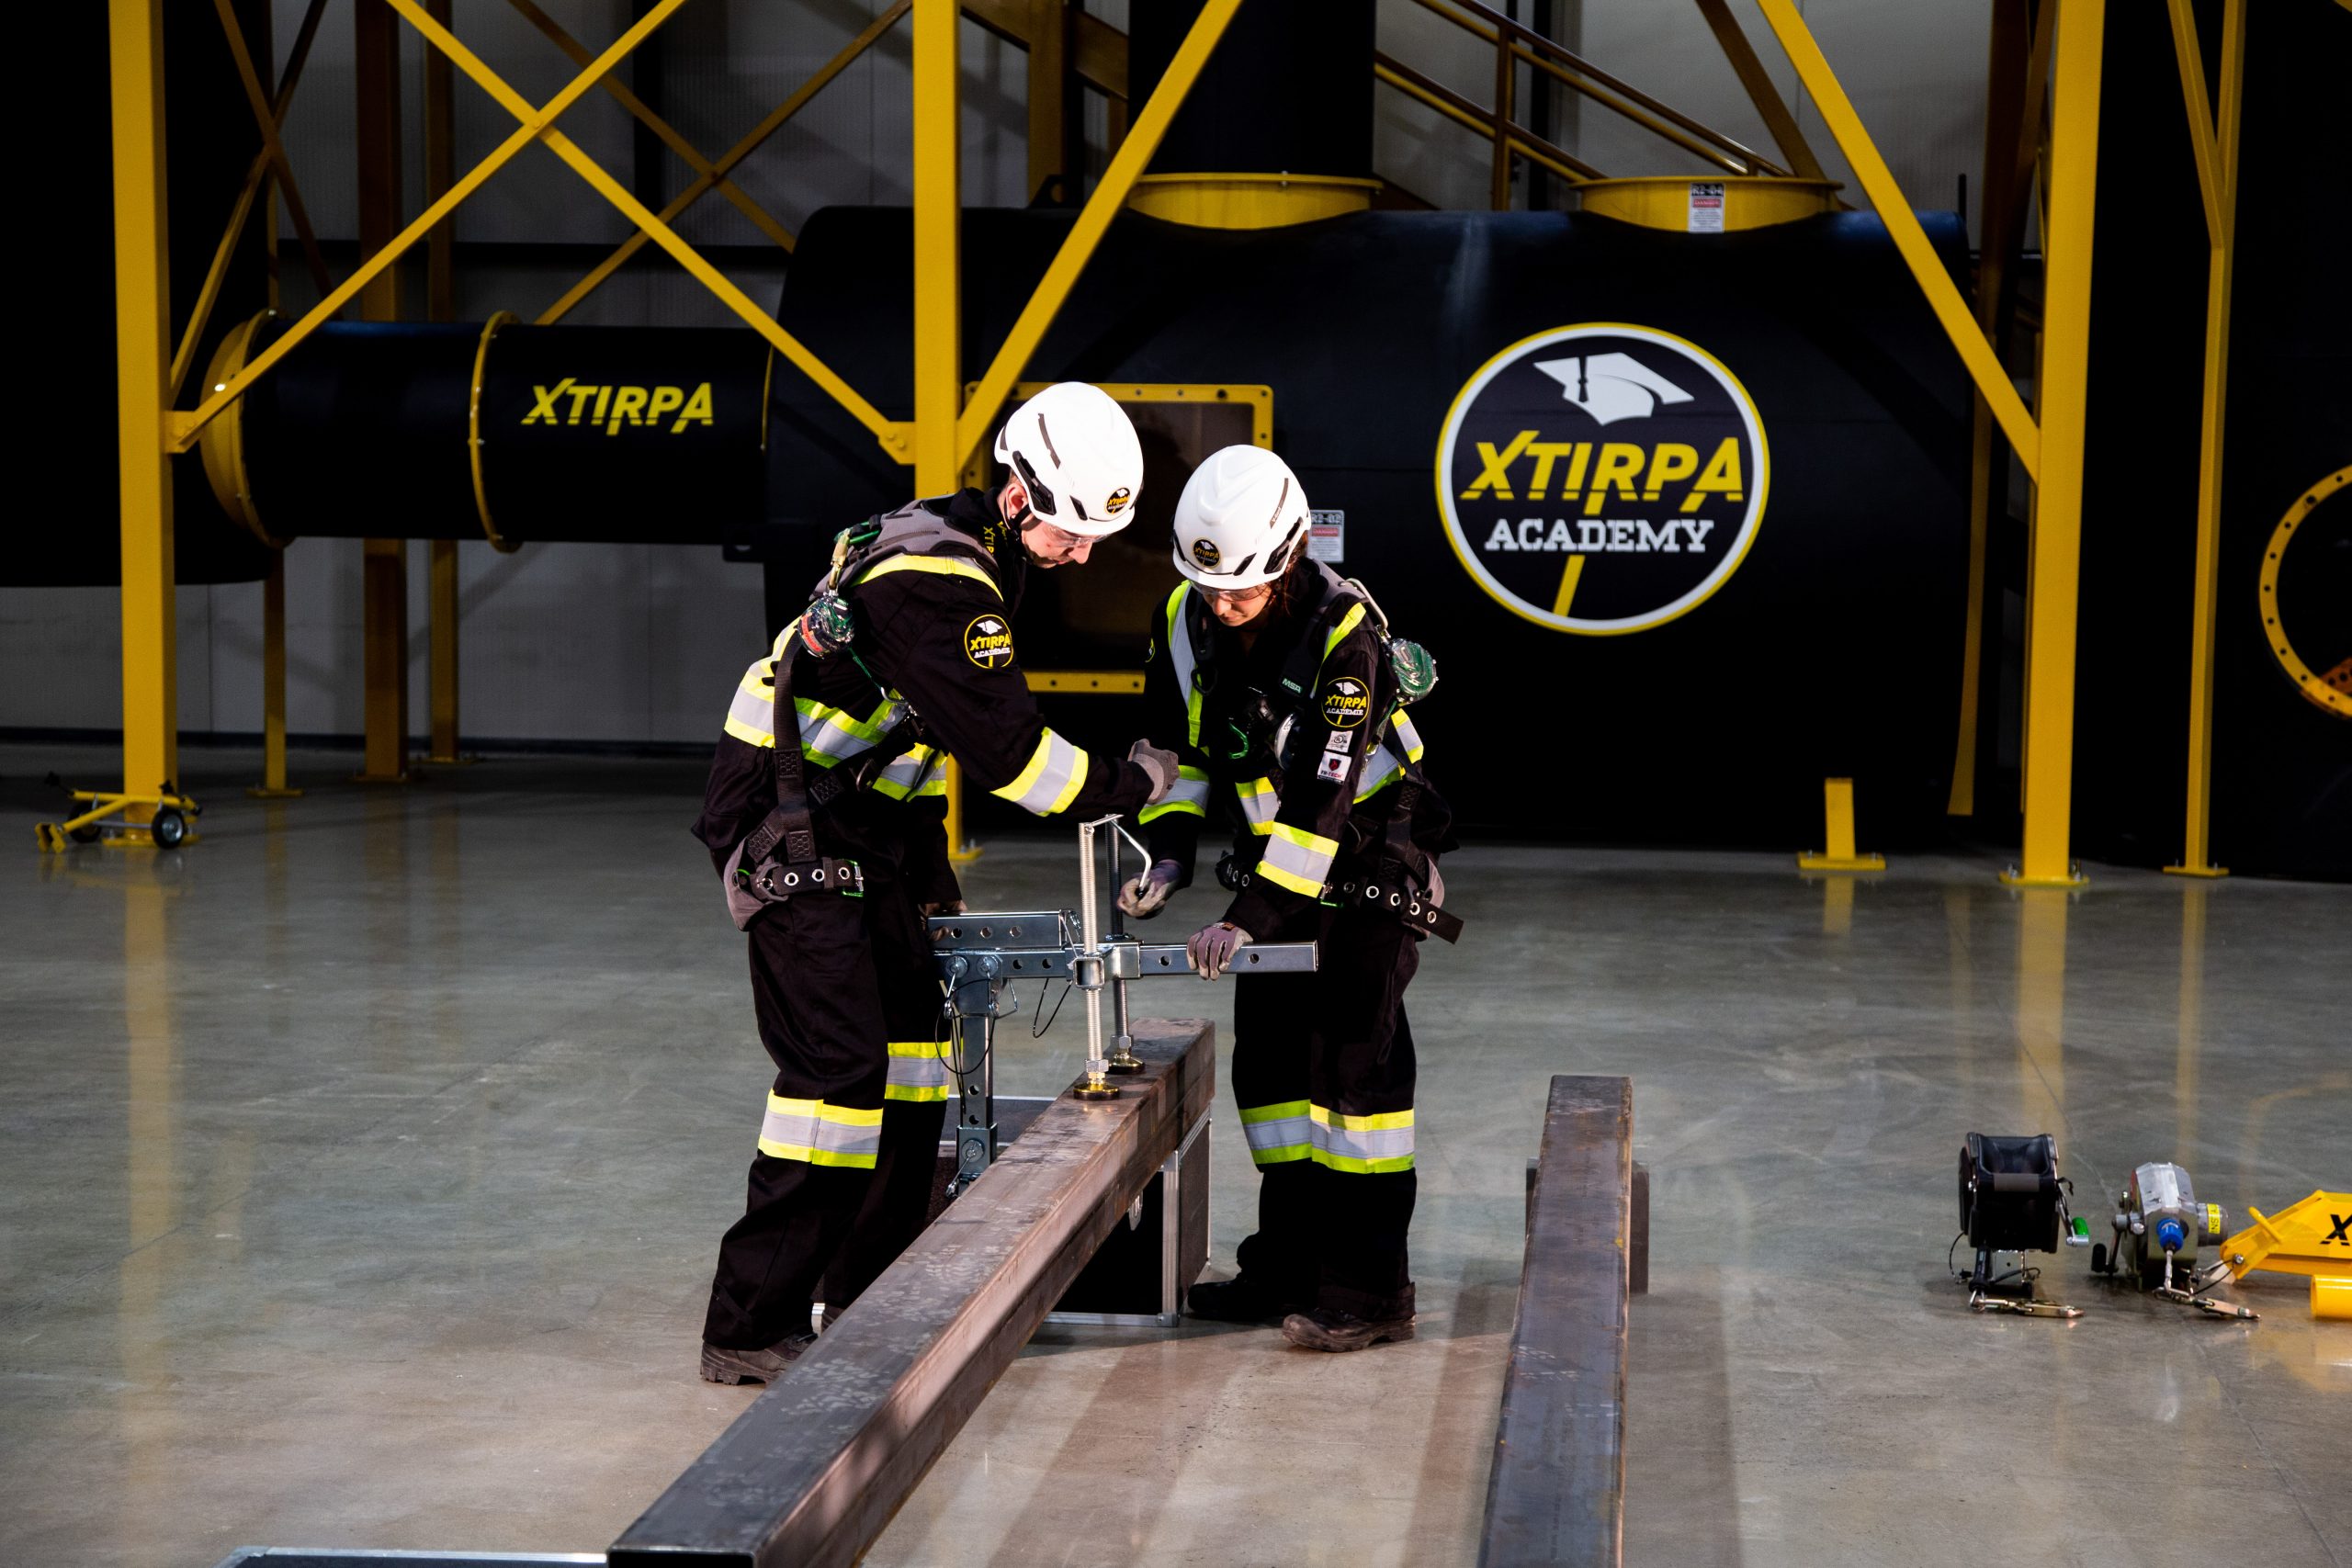 xtirpa-academy-confined-space-access-products-rescue--7899